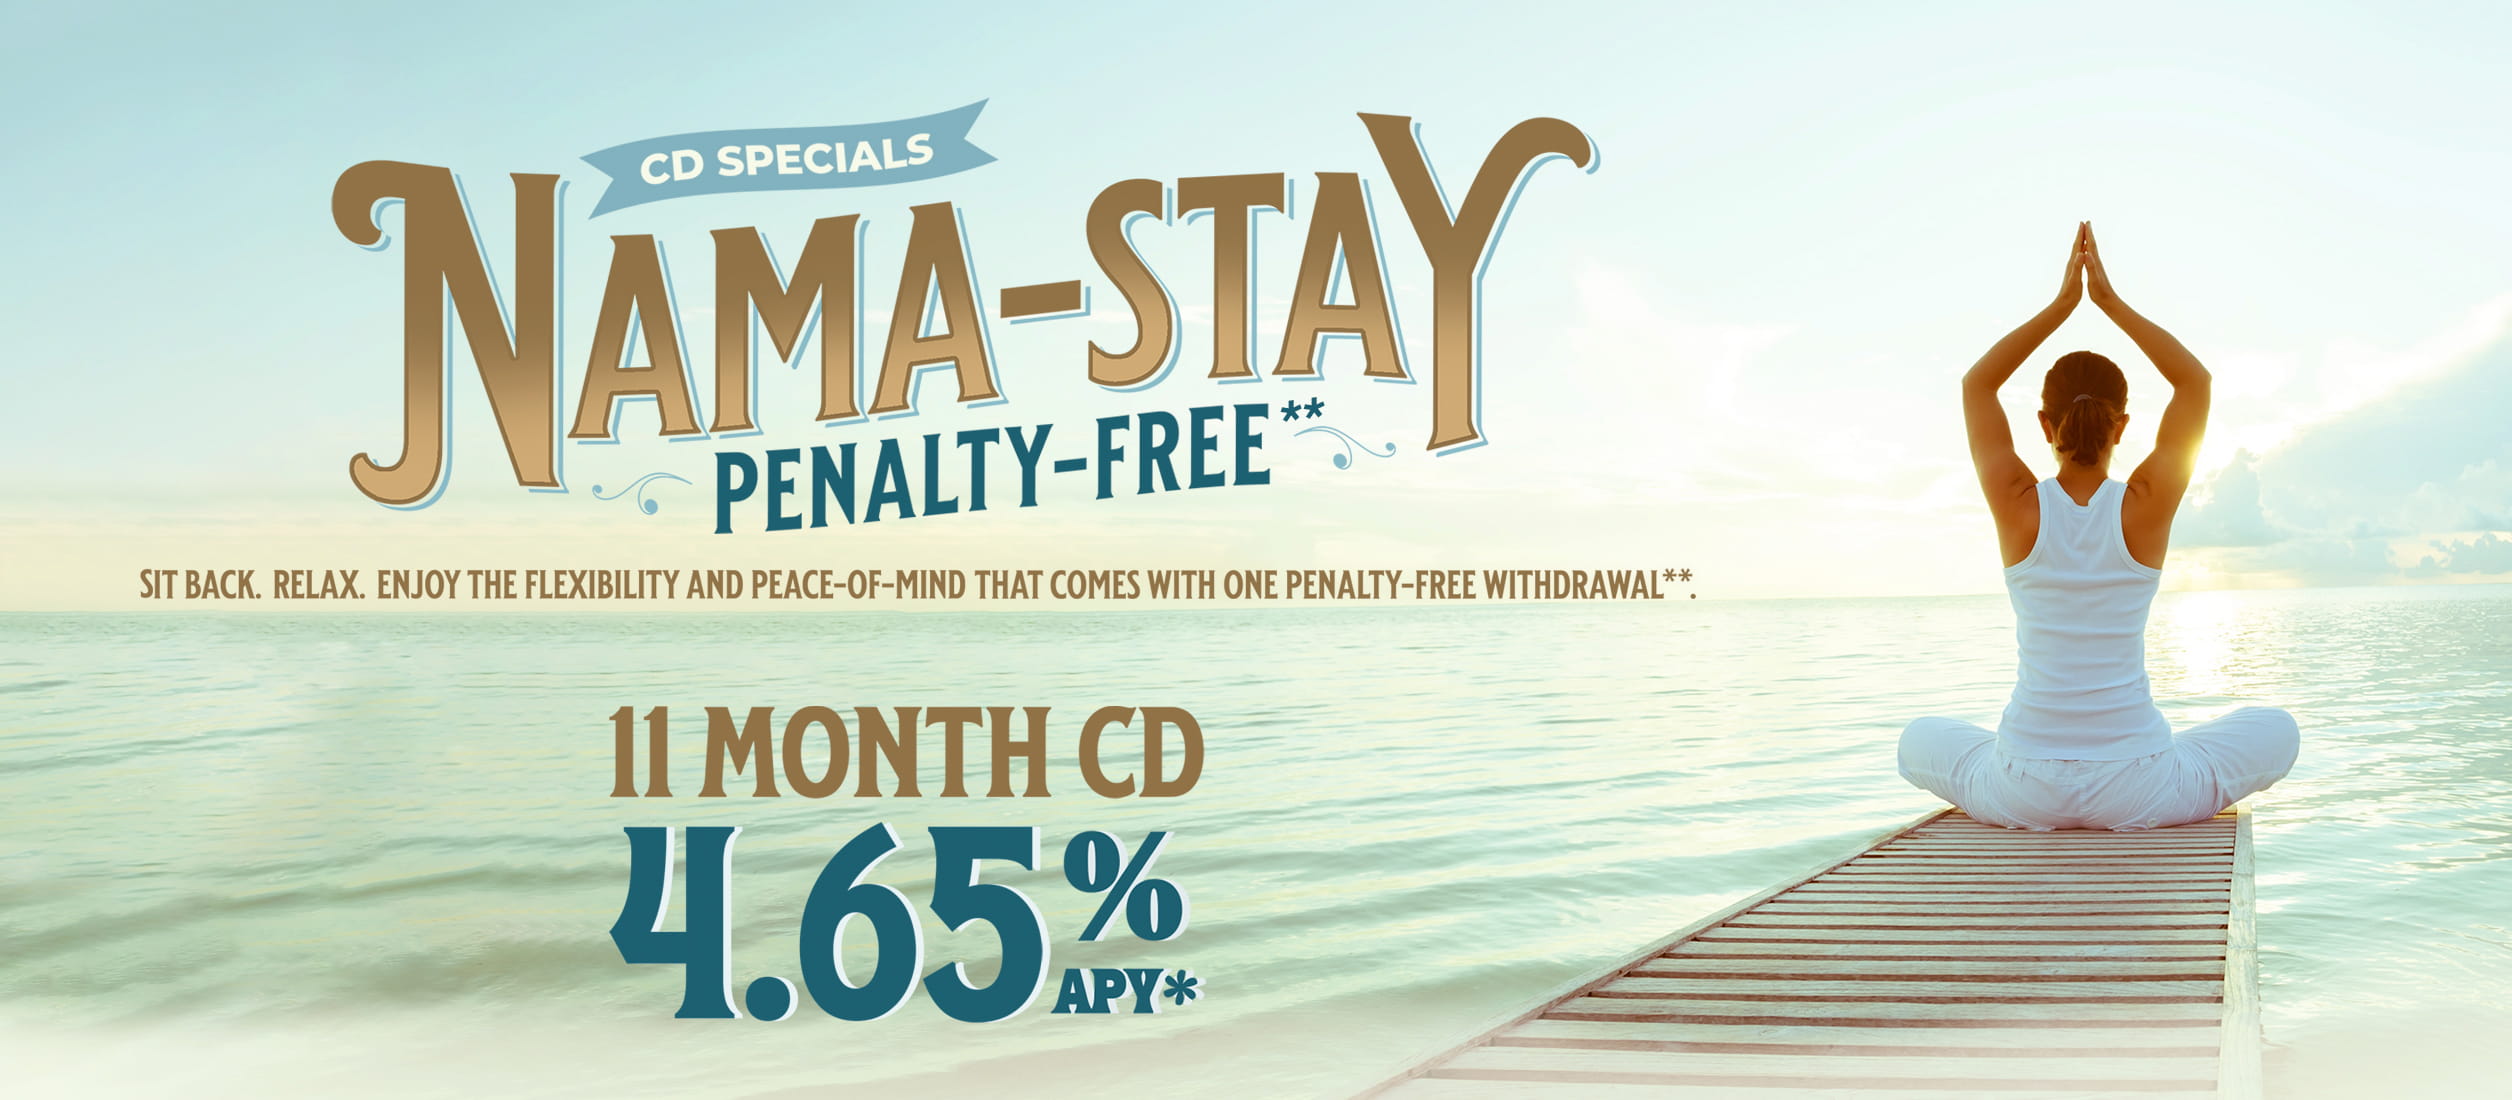 Nama-Stay CD Special. Penalty-Free**